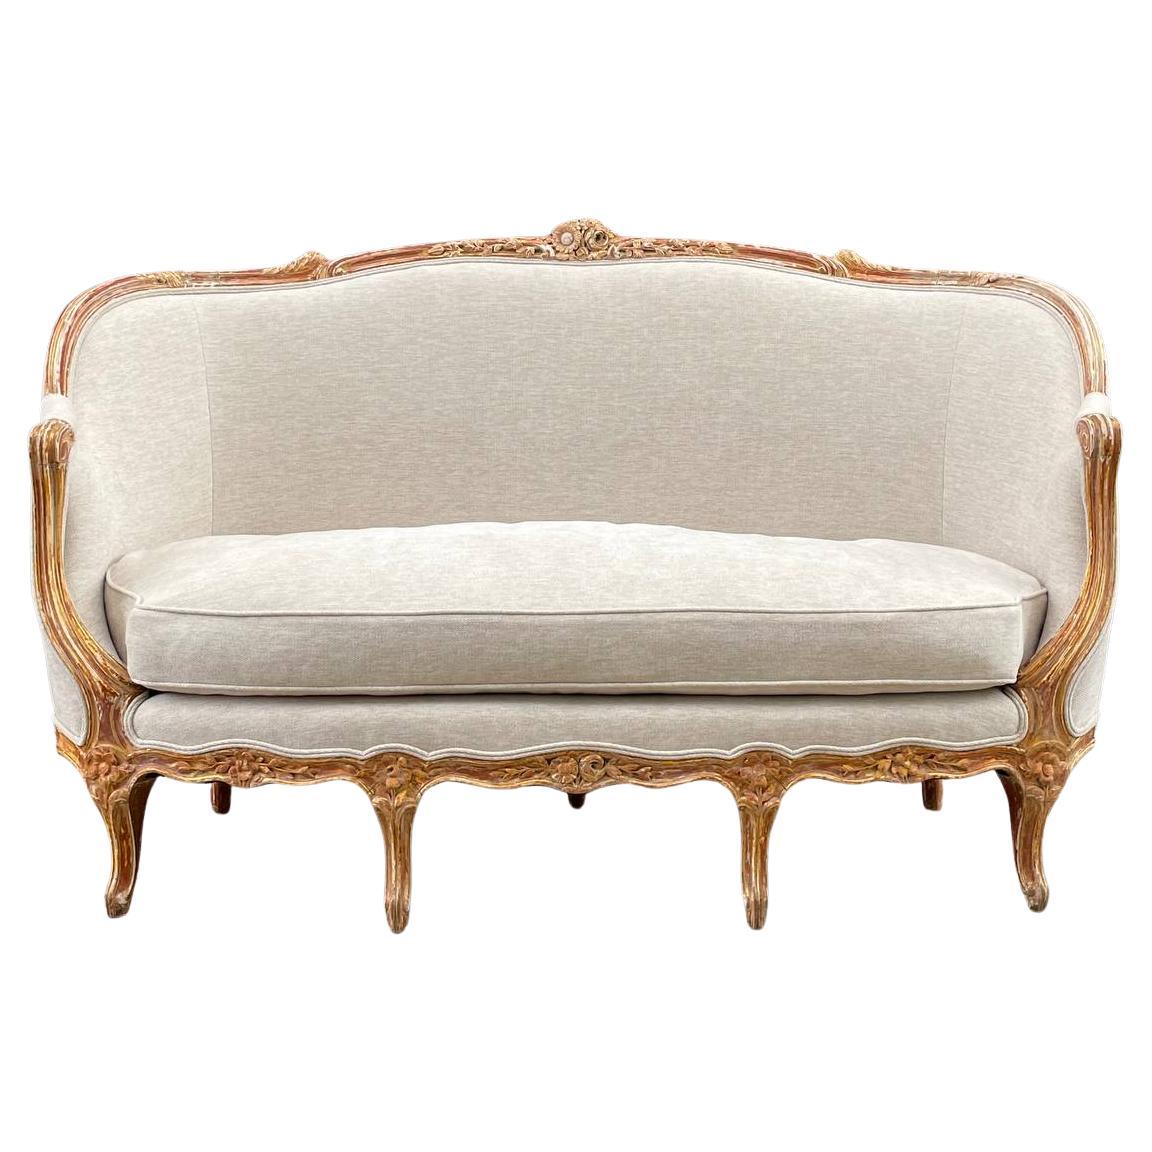 Antique French Louis XVI Sofa with Carved Details